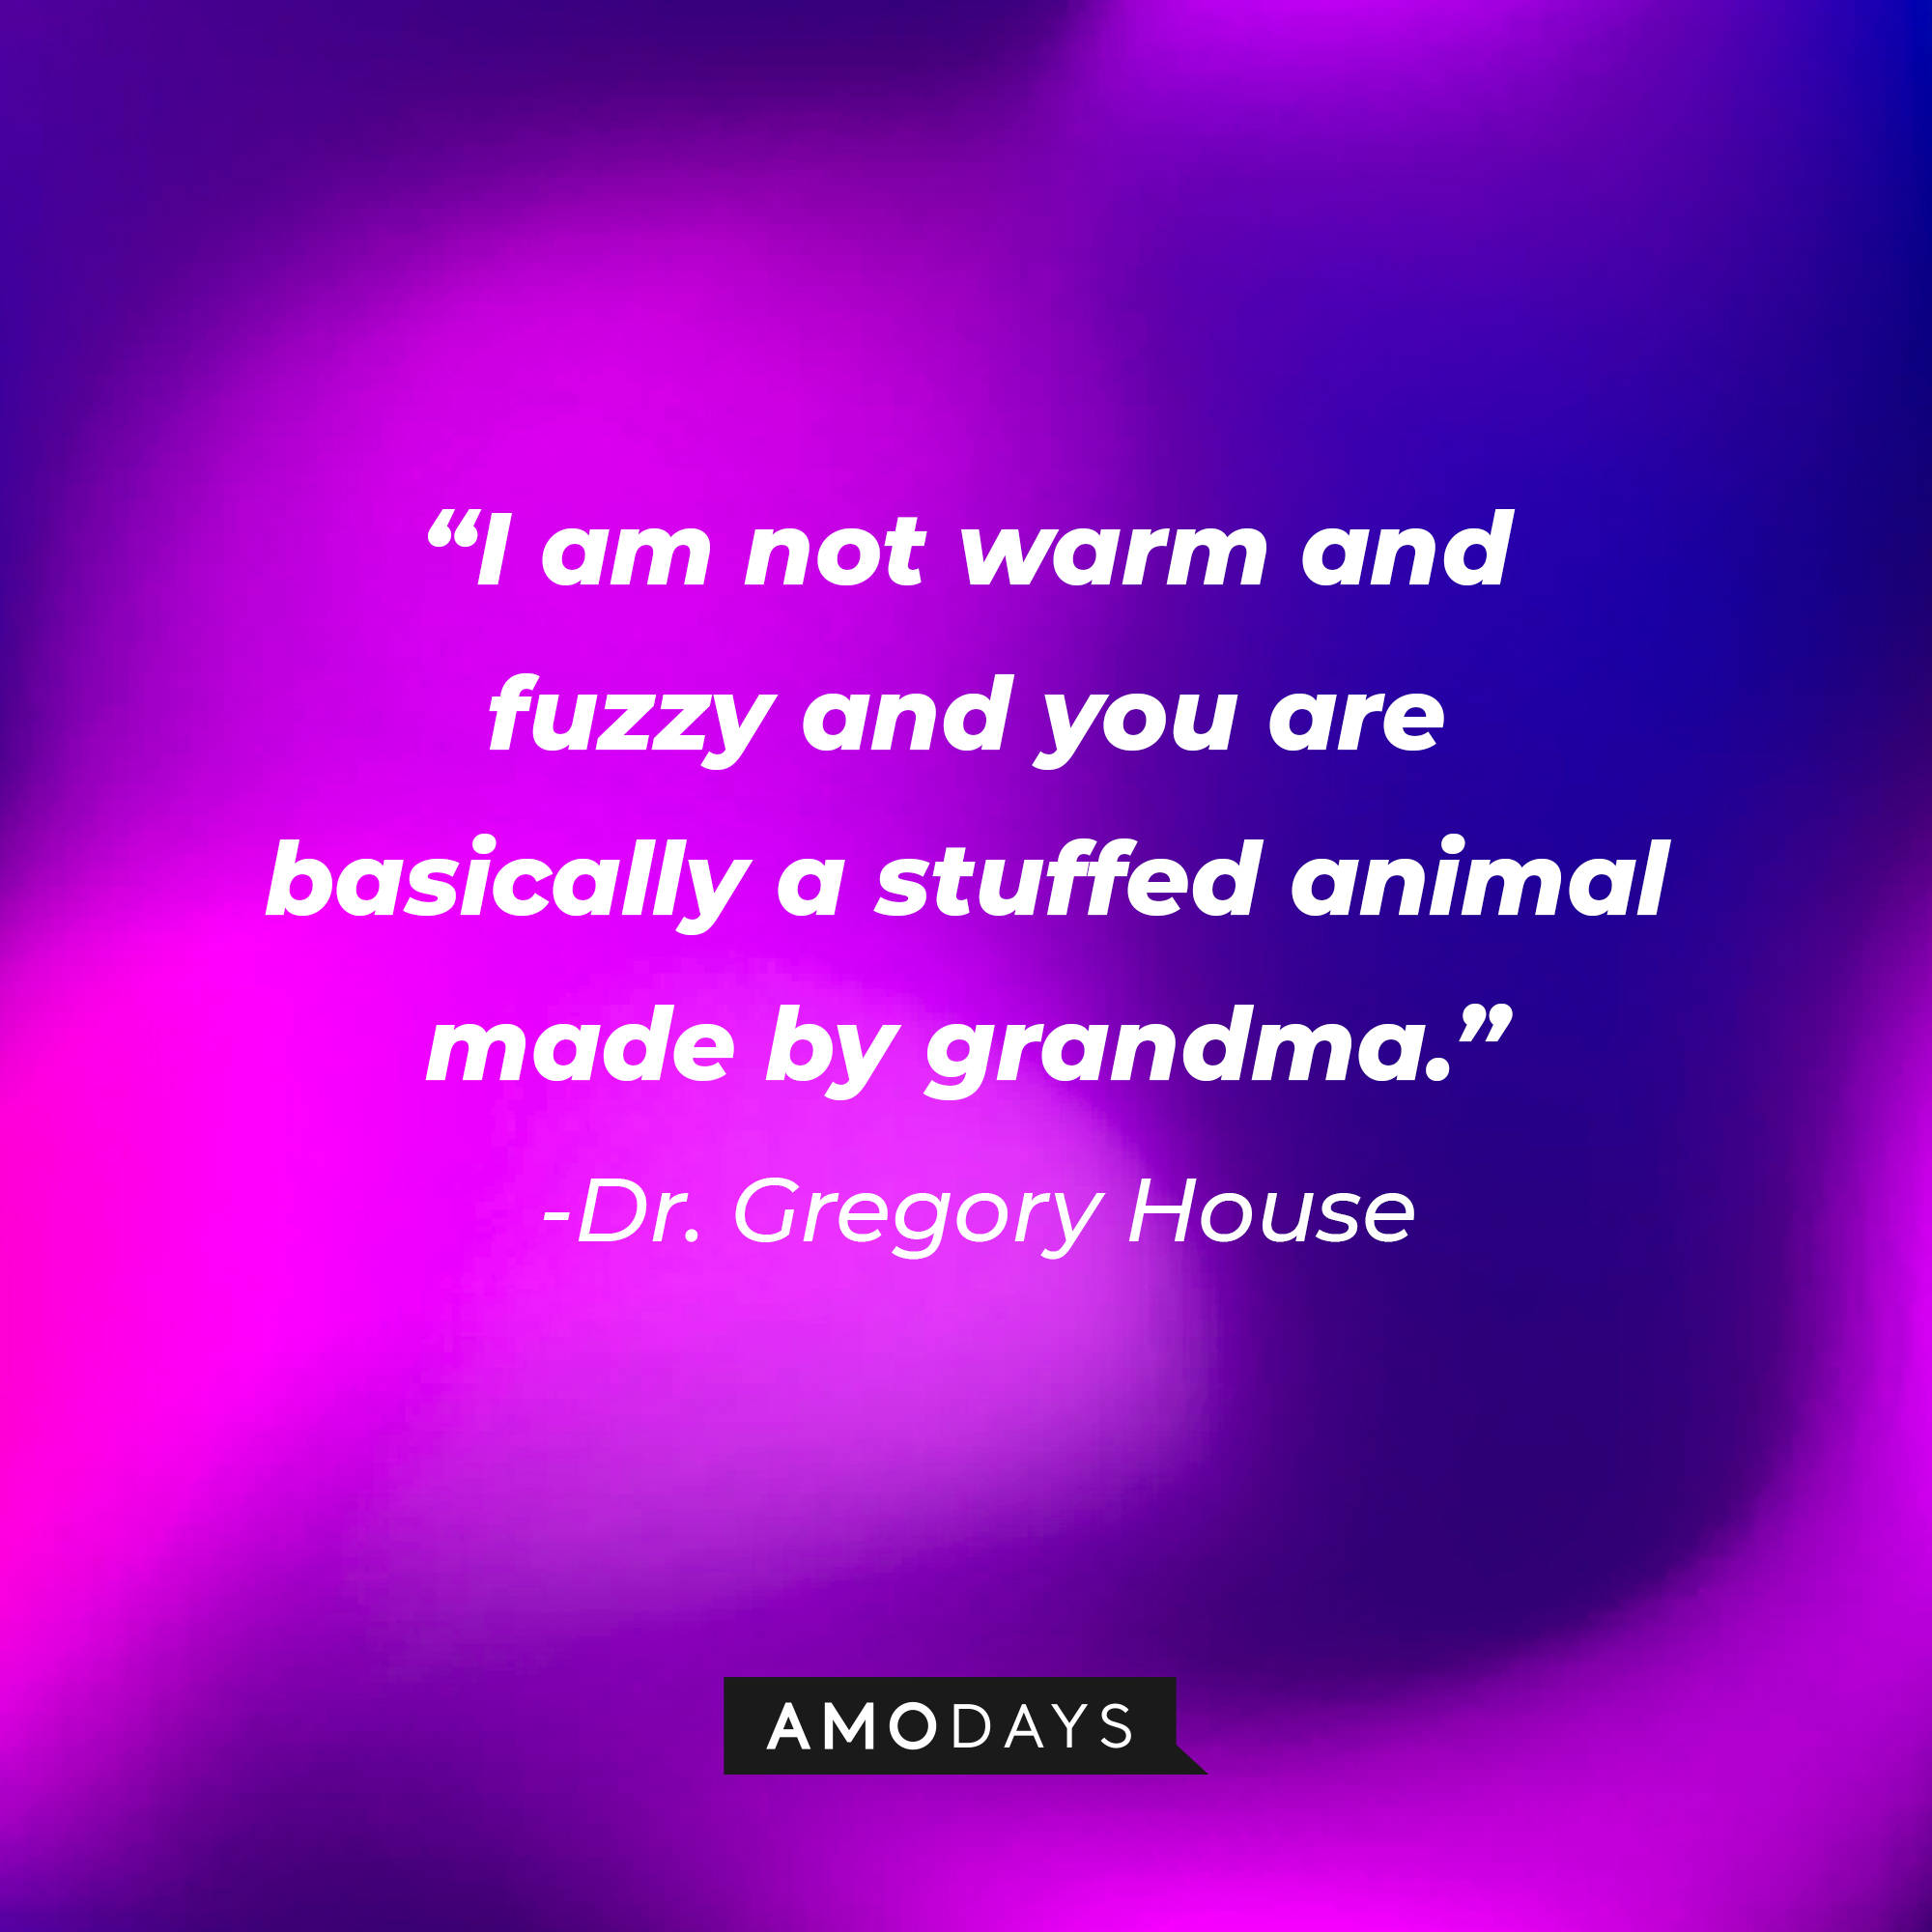 Dr. Gregory House’s quote: “I am not warm and fuzzy and you are basically a stuffed animal made by grandma." | Source: AmoDays